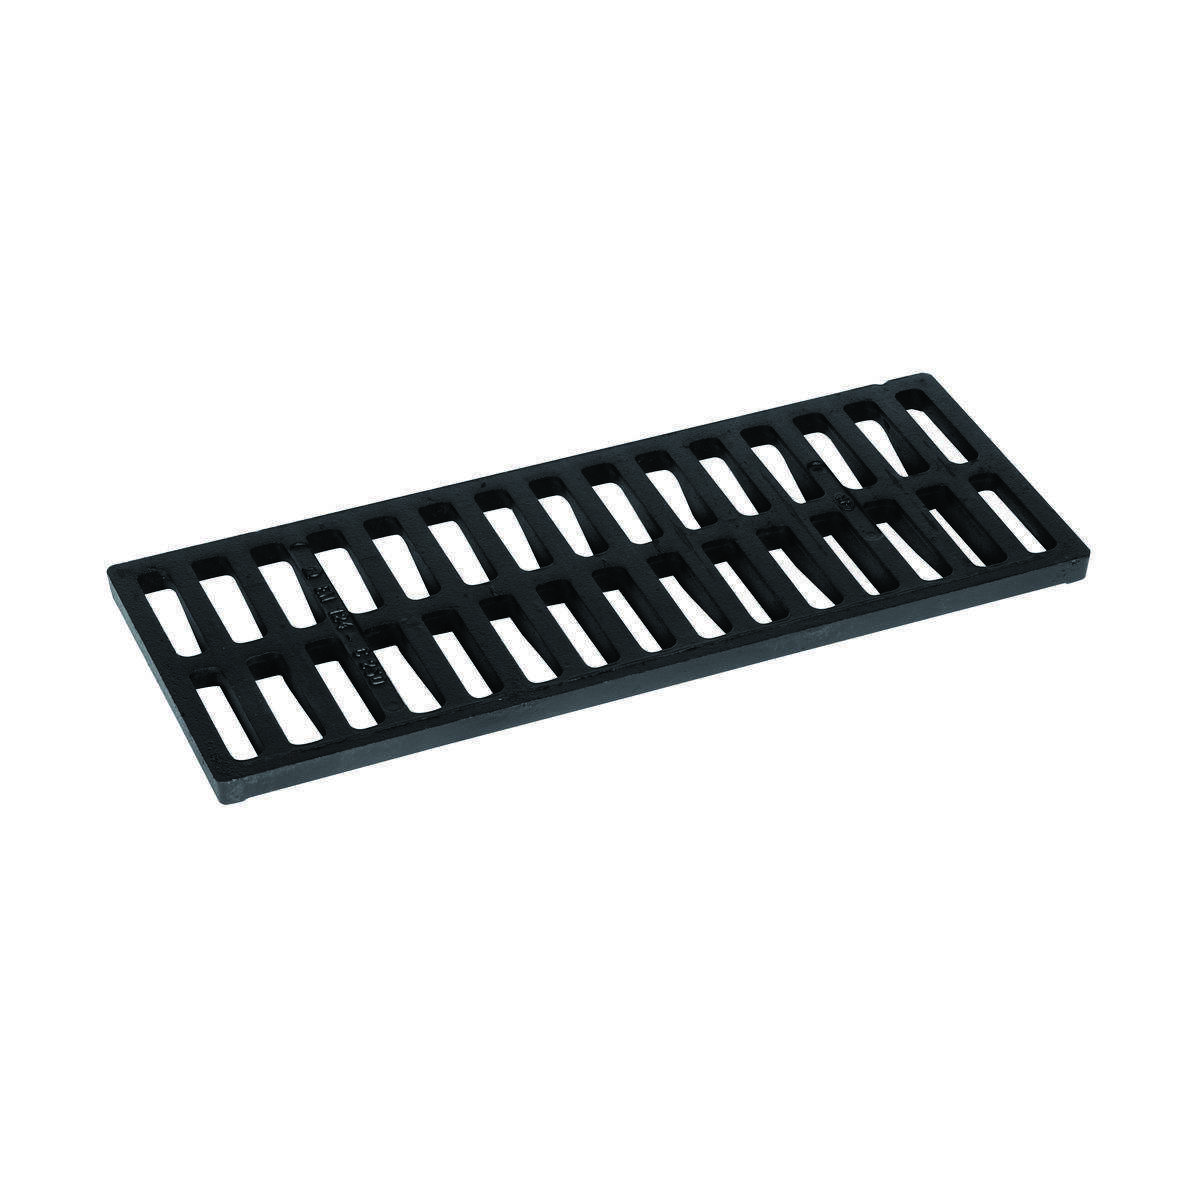 GRILLE CANIVEAU FONTE NF PLATE 750X300 C250